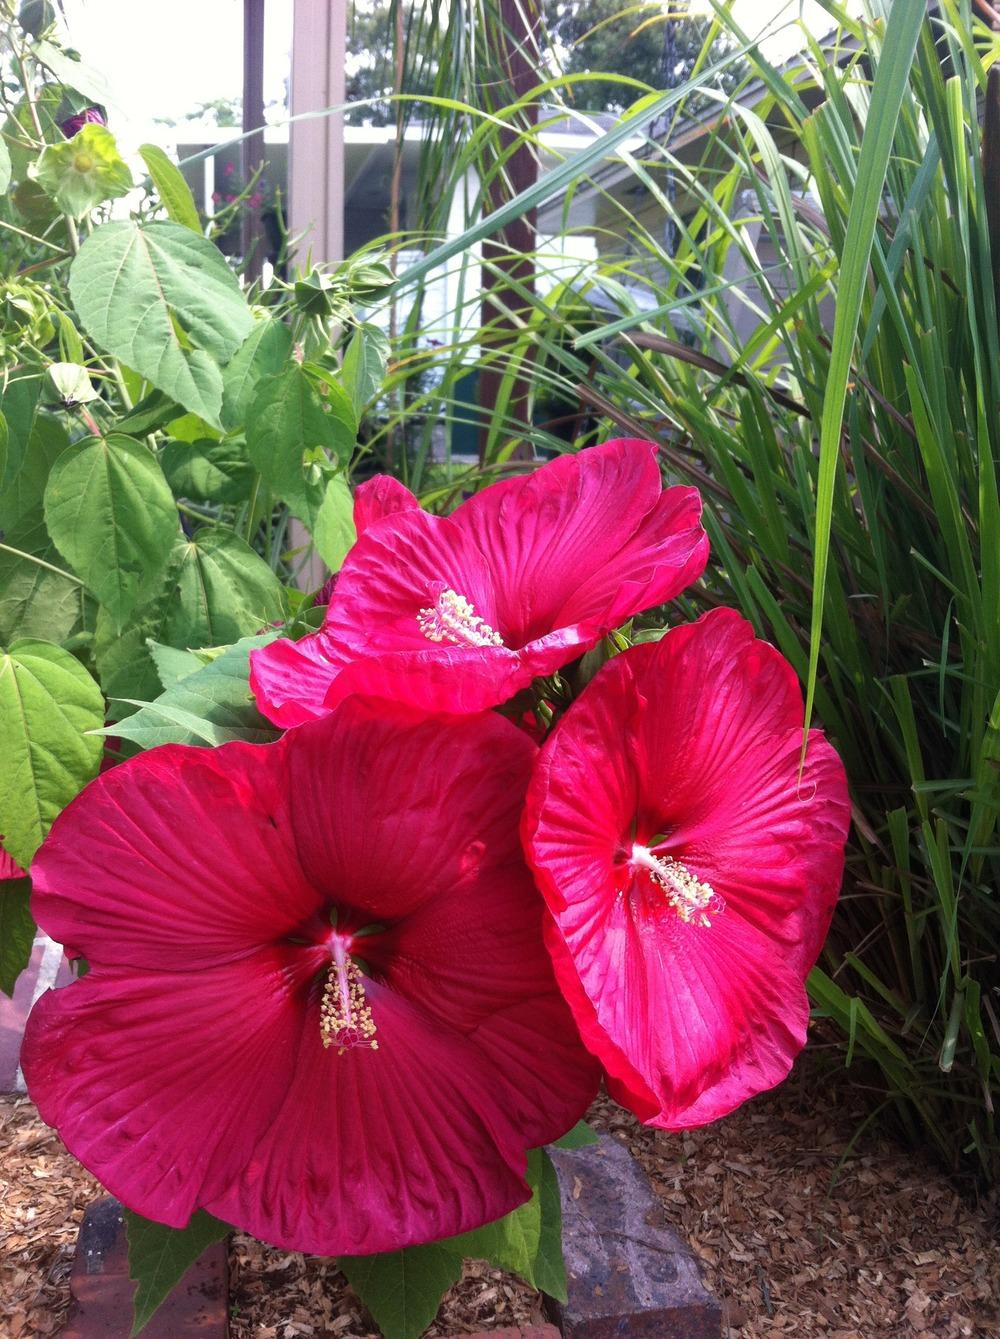 Photo of Hardy Hibiscus (Hibiscus moscheutos) uploaded by karafrederick1